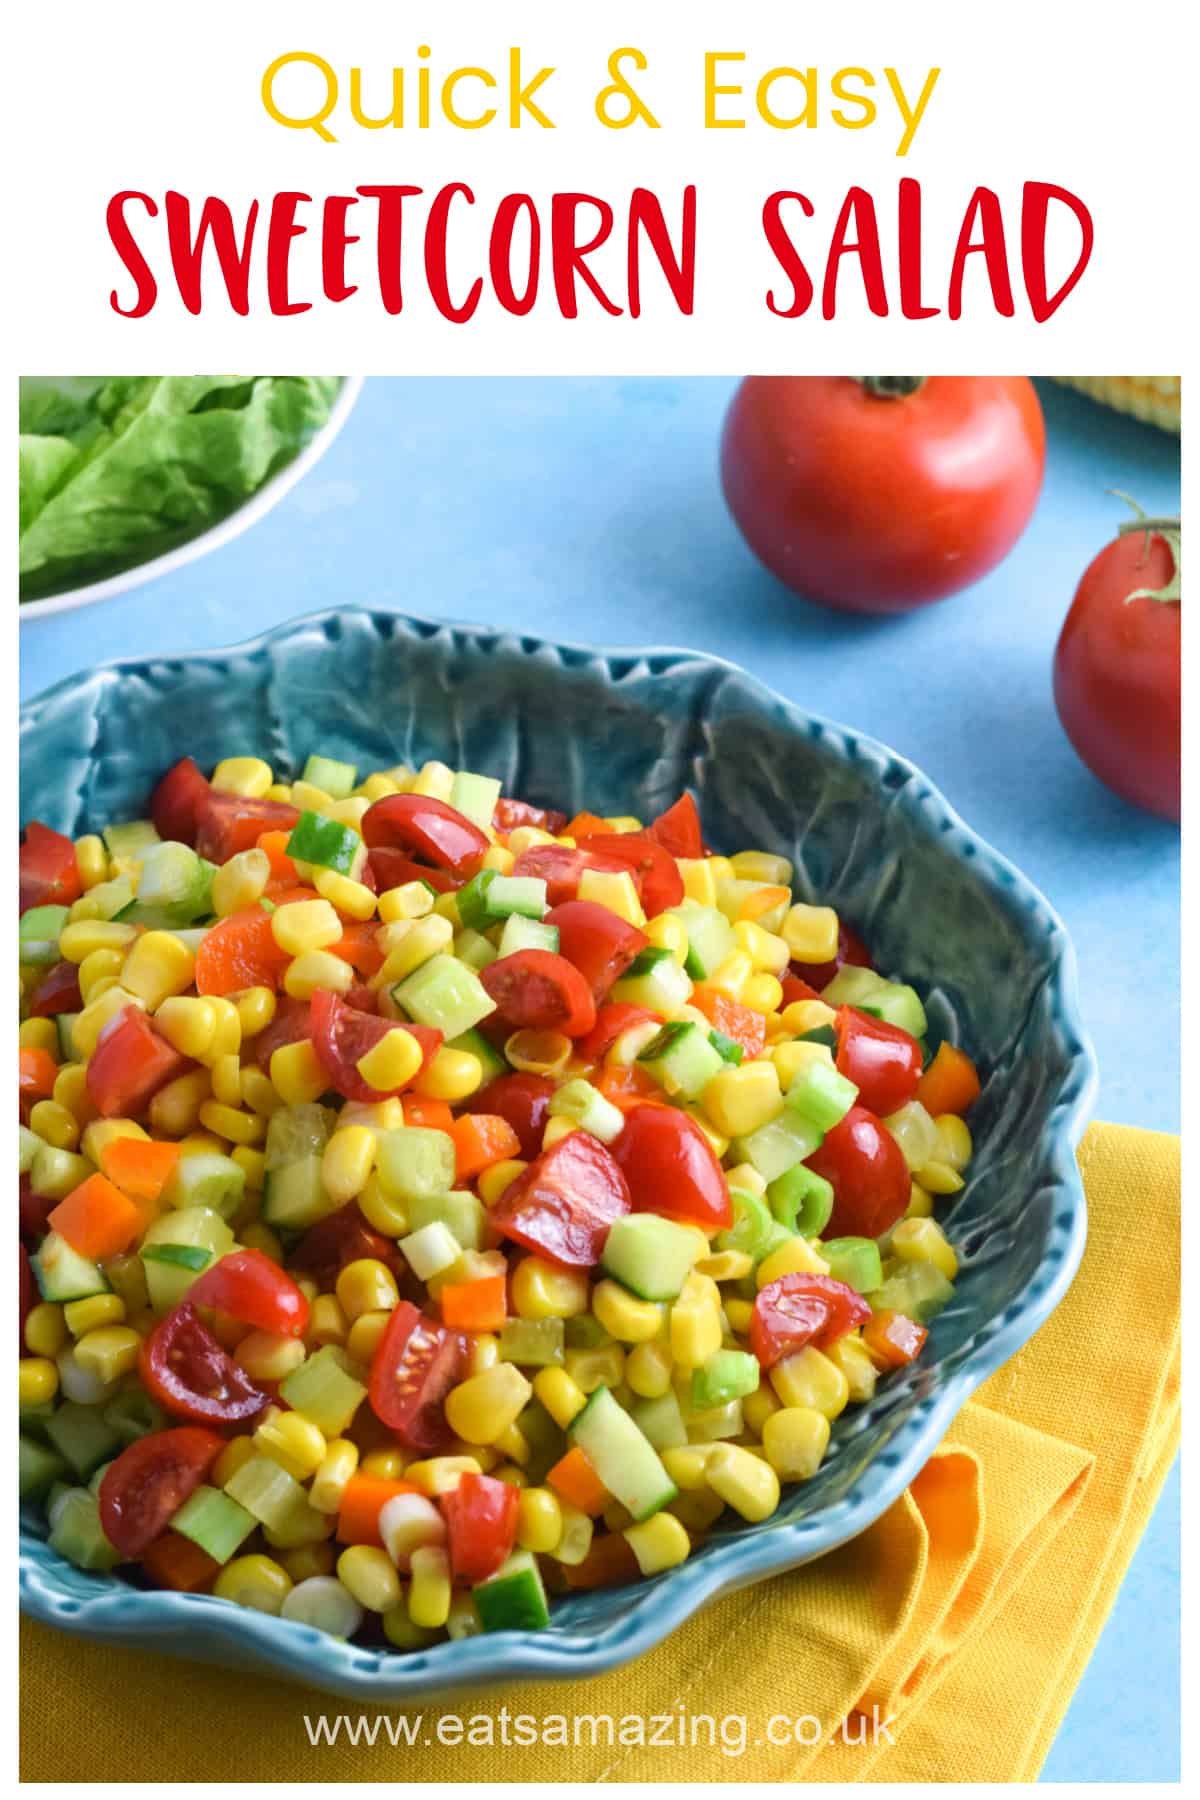 How to make a quick and easy sweetcorn salad for kids - great side dish recipe for mid-week family meals